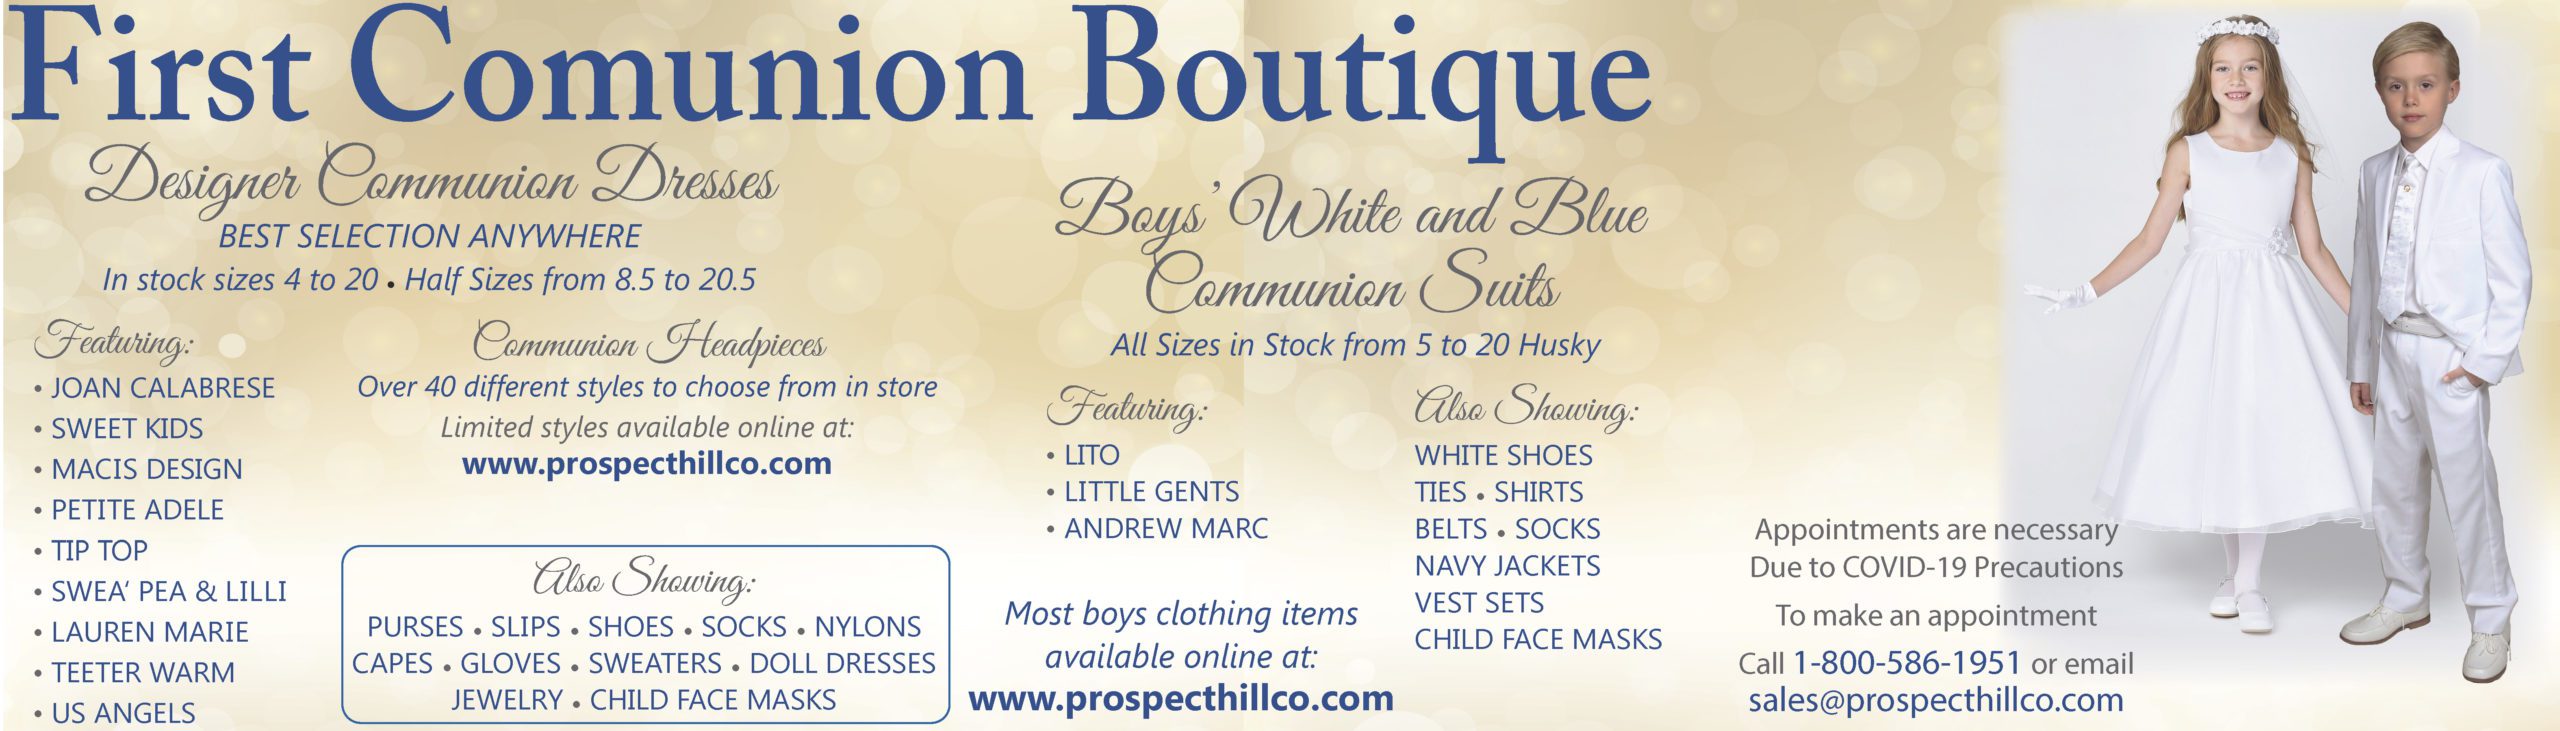 2022 First Communion Boutique at Prospect Hill Co in Brockton, MA | Religious Goods